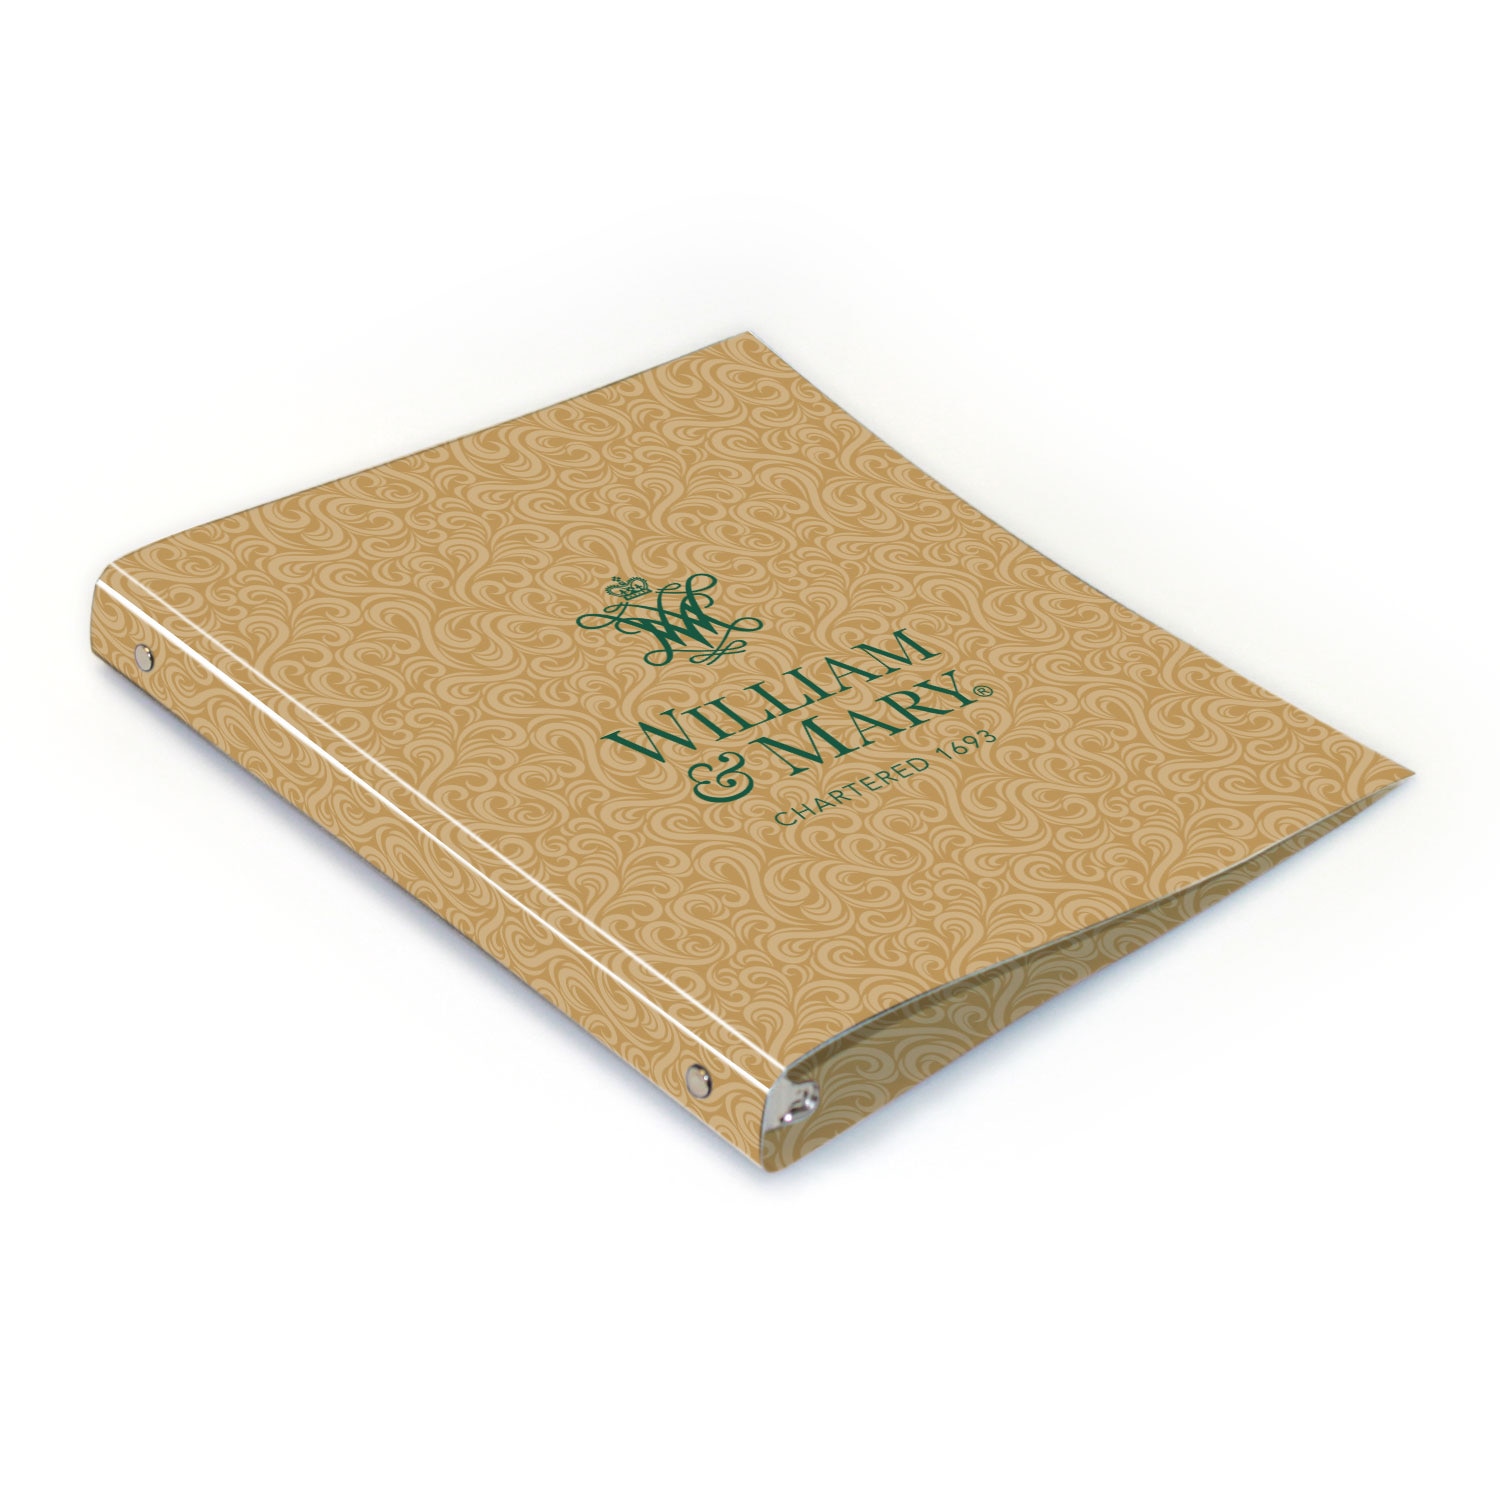 William & Mary Full Color 2 sided Imprinted Flexible 1" Logo 2 Binder 10.5" x 11.5"